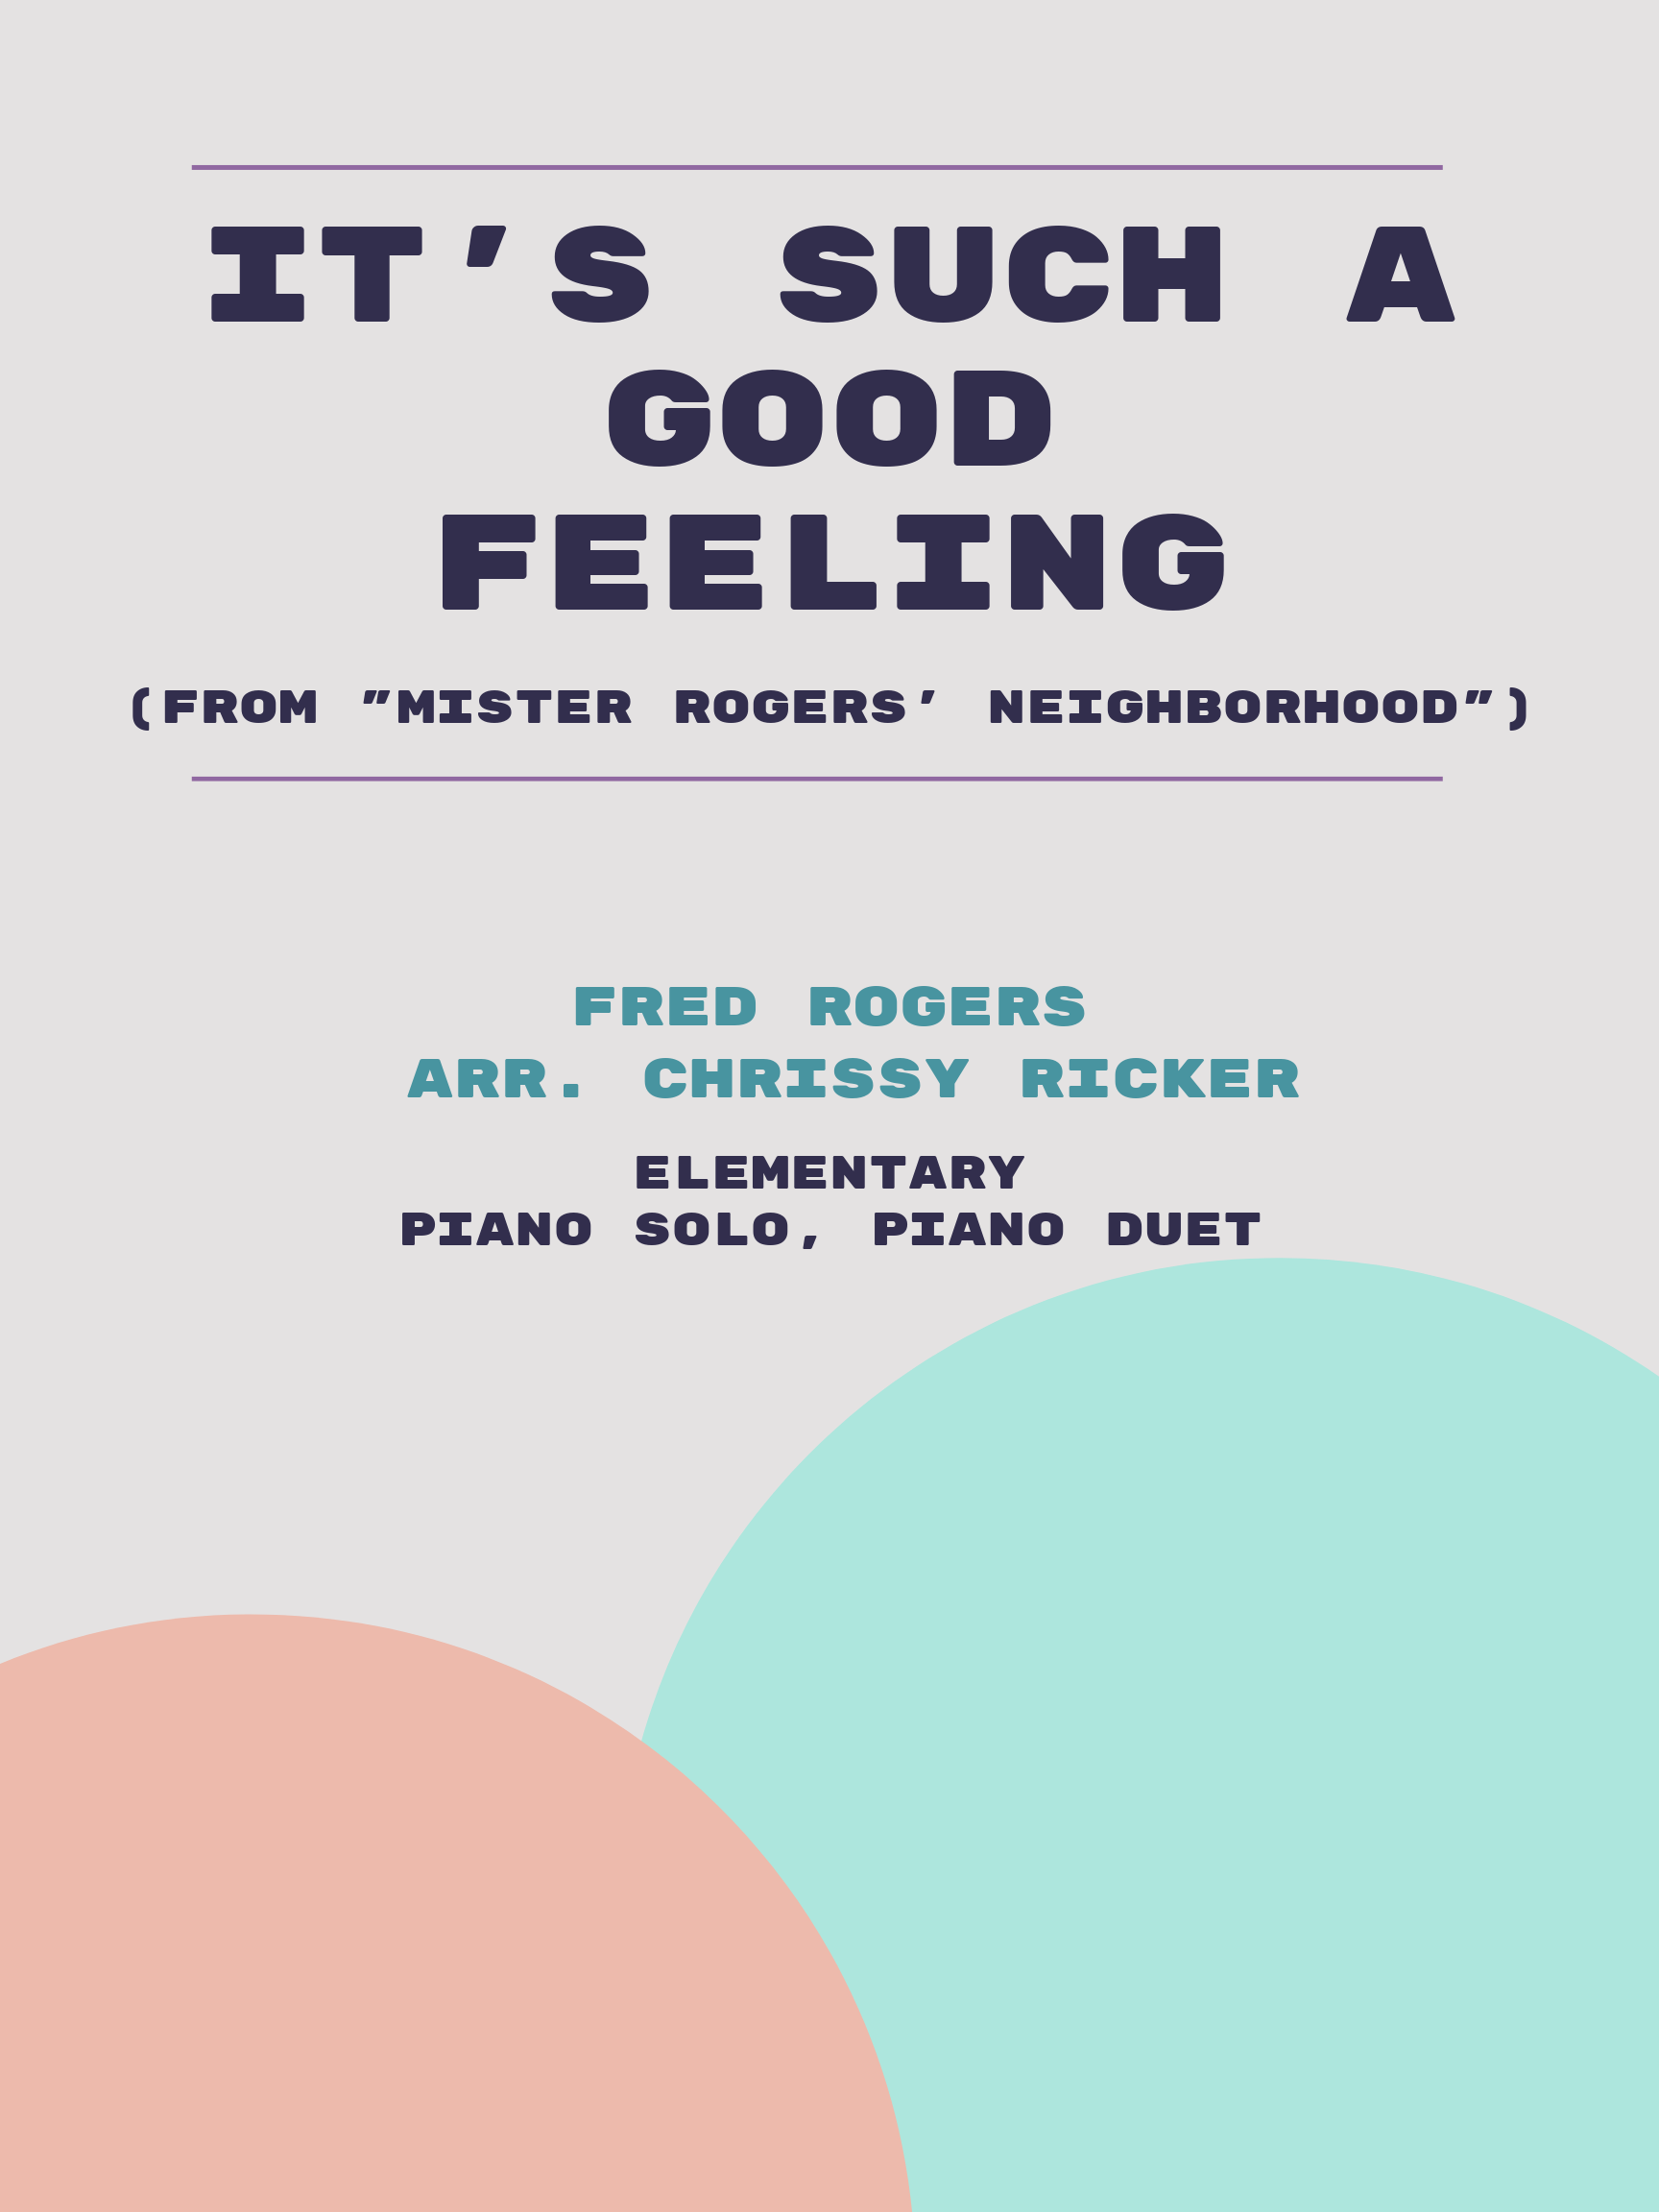 It's Such a Good Feeling by Fred Rogers